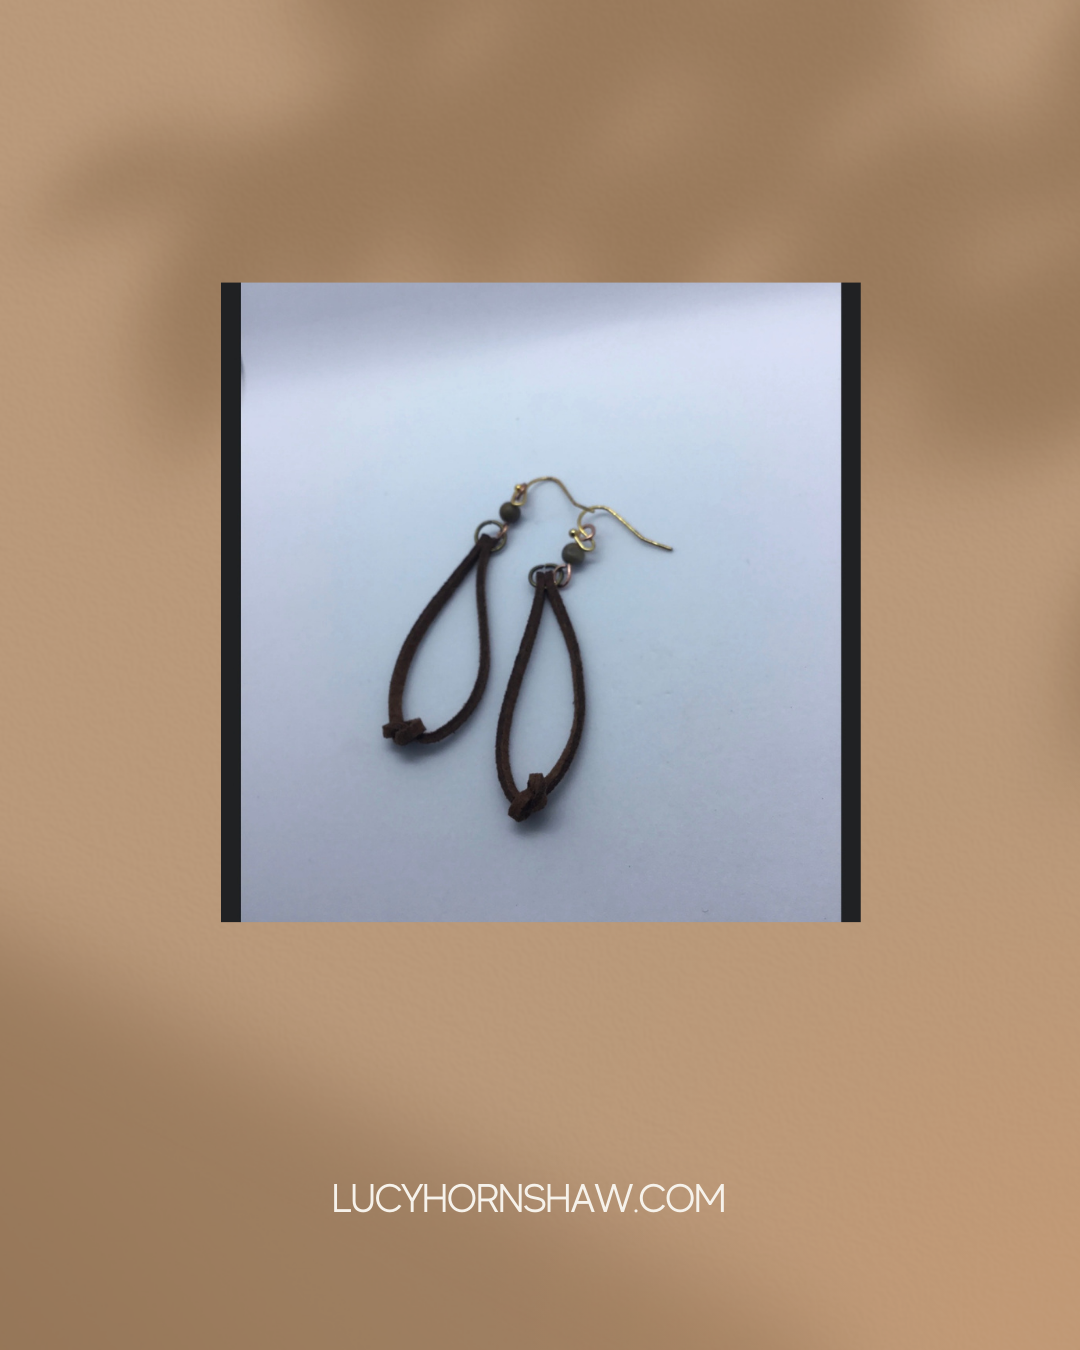 Brown leather cord knot earrings with bead